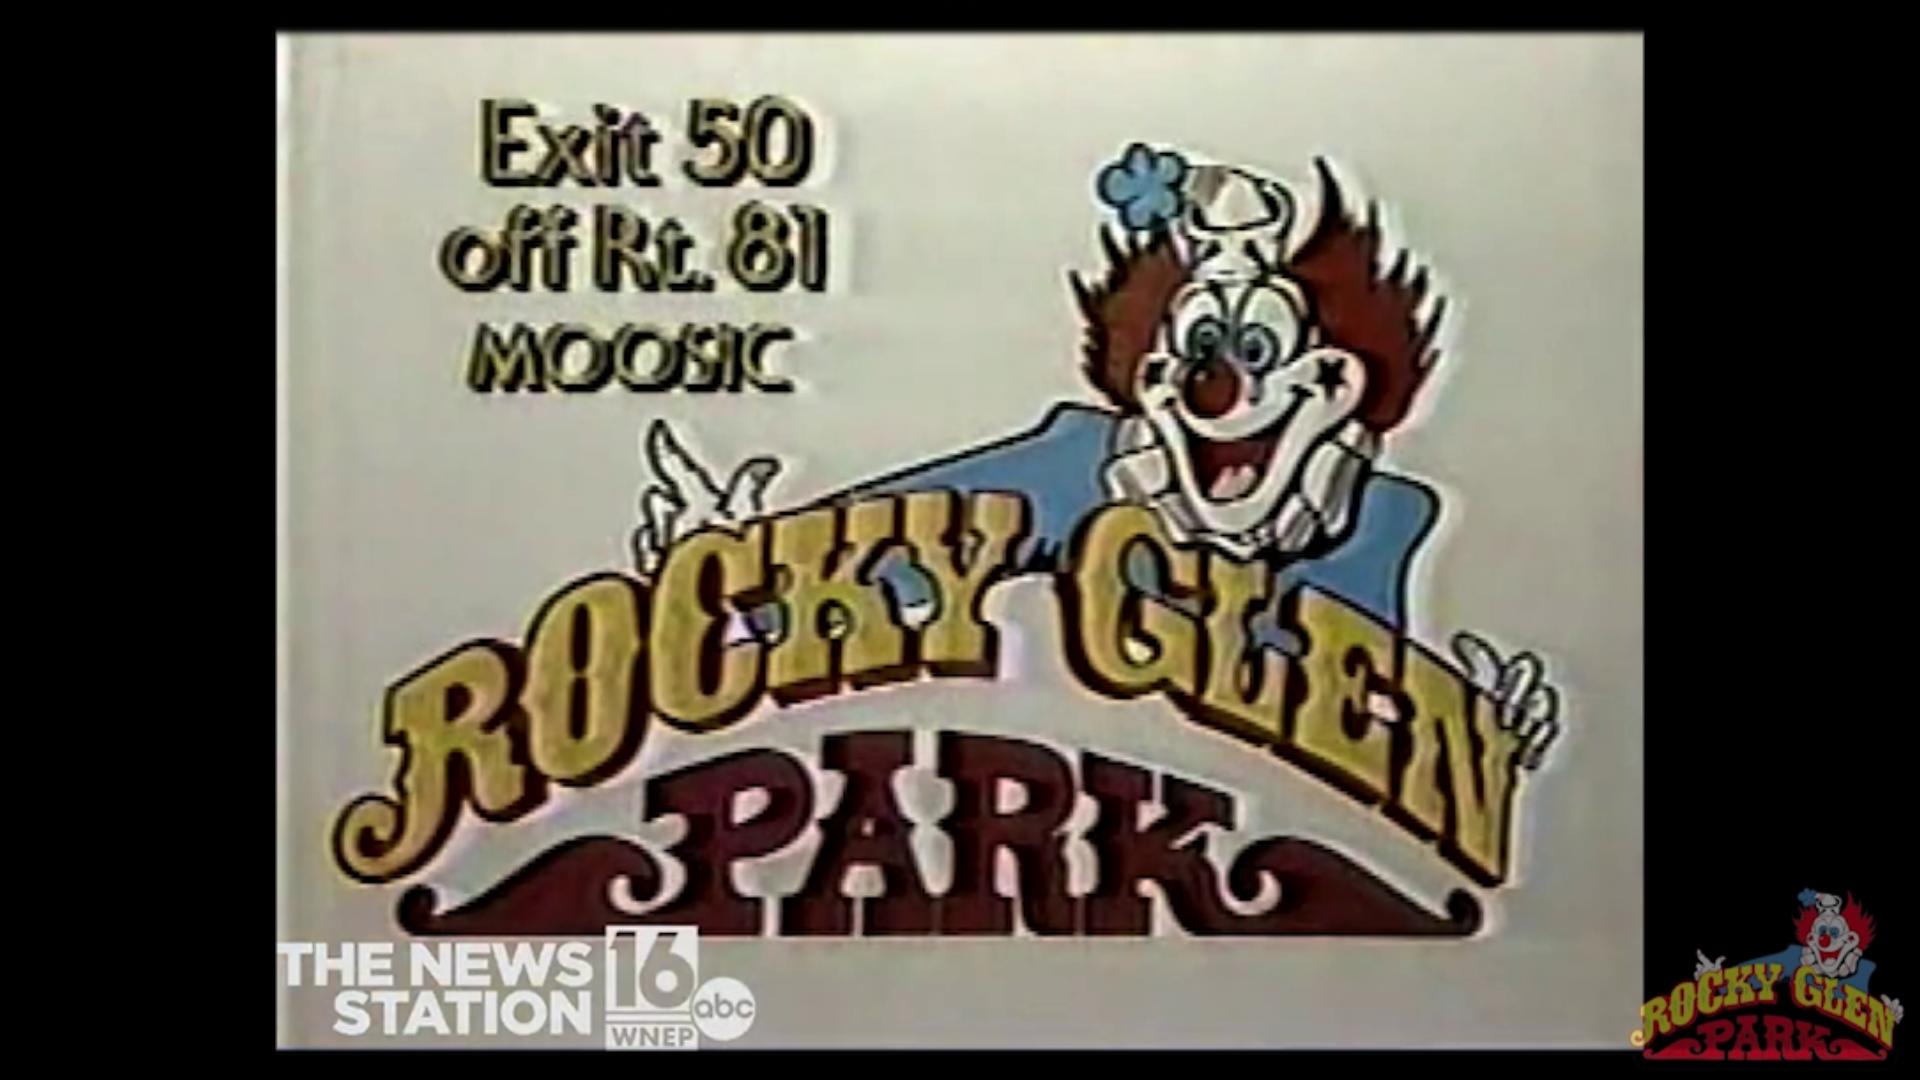 Rocky Glen Park. It is gone but certainly not forgotten. Take one last look at the amusement park in Moosic, PA, that brought out the young and the young at heart.